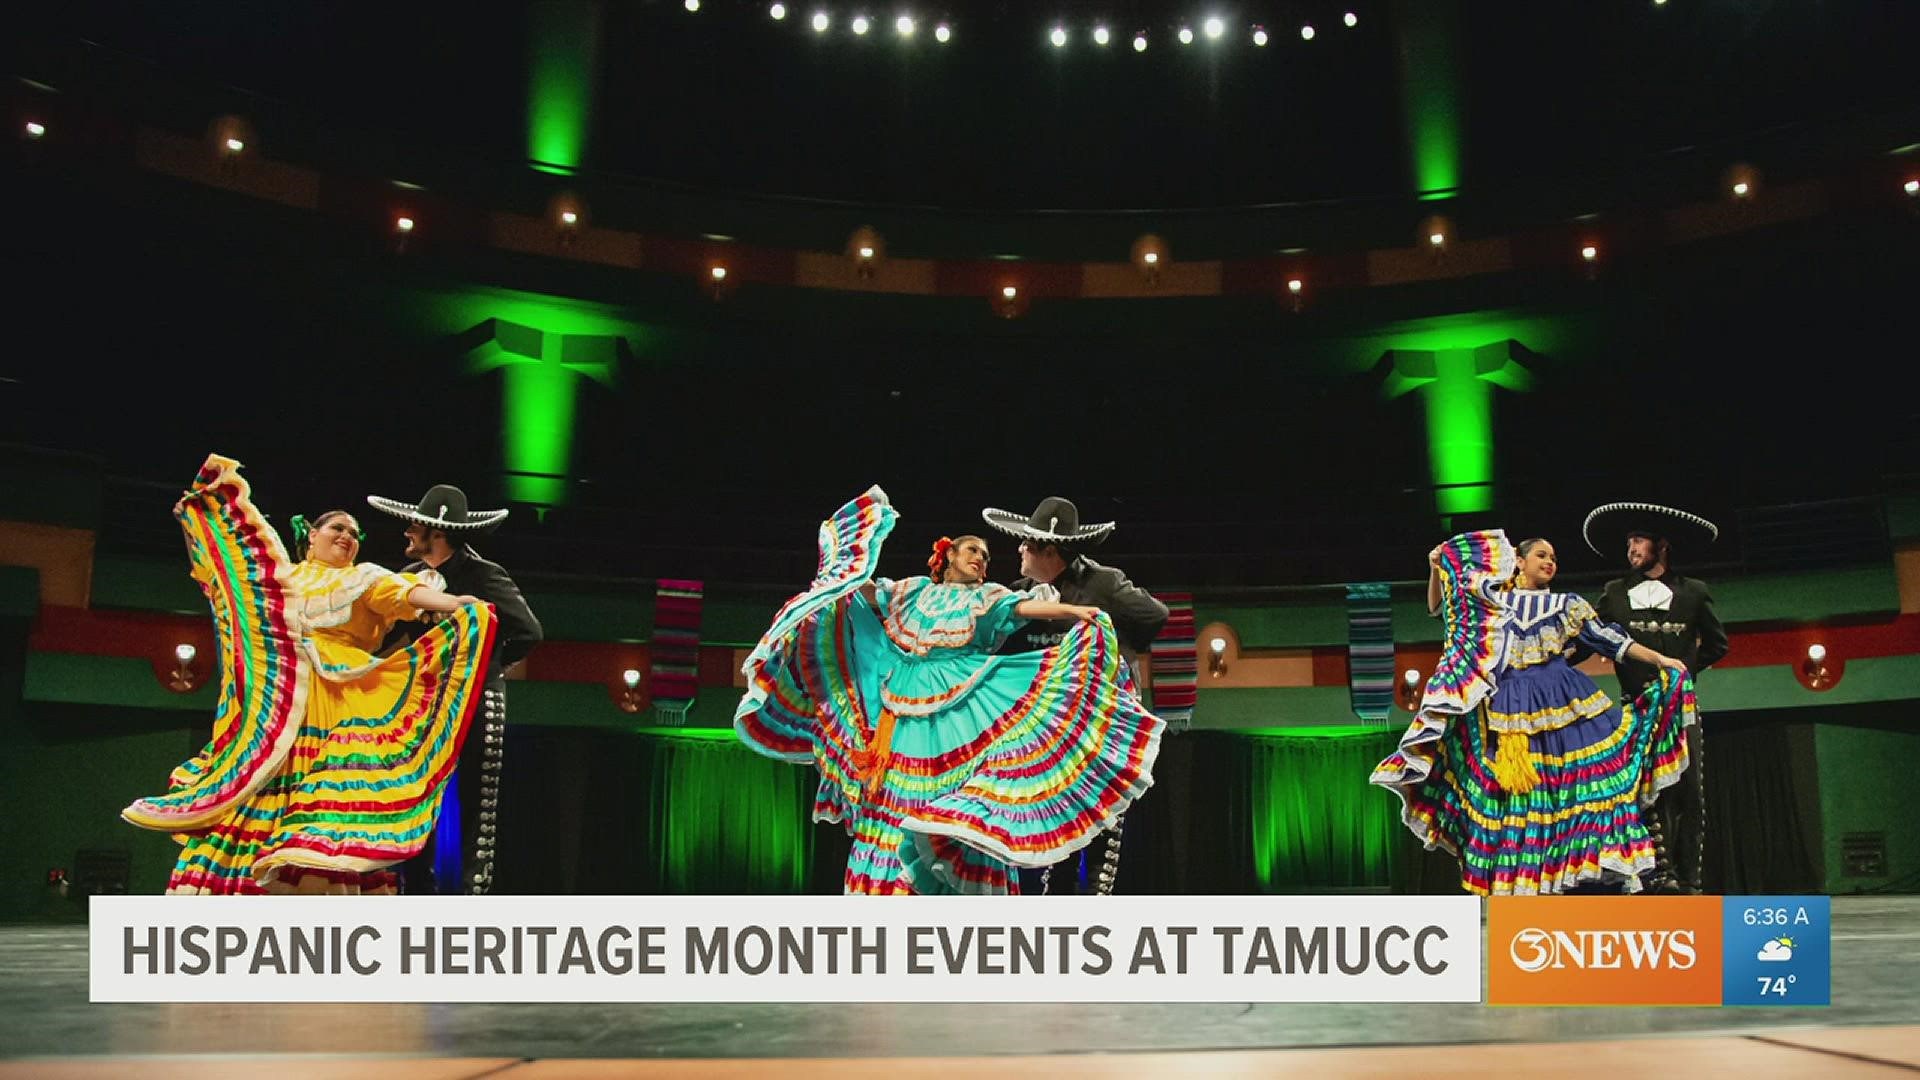 Several events will be taking place at the Island University to celebrate Hispanic heritage.